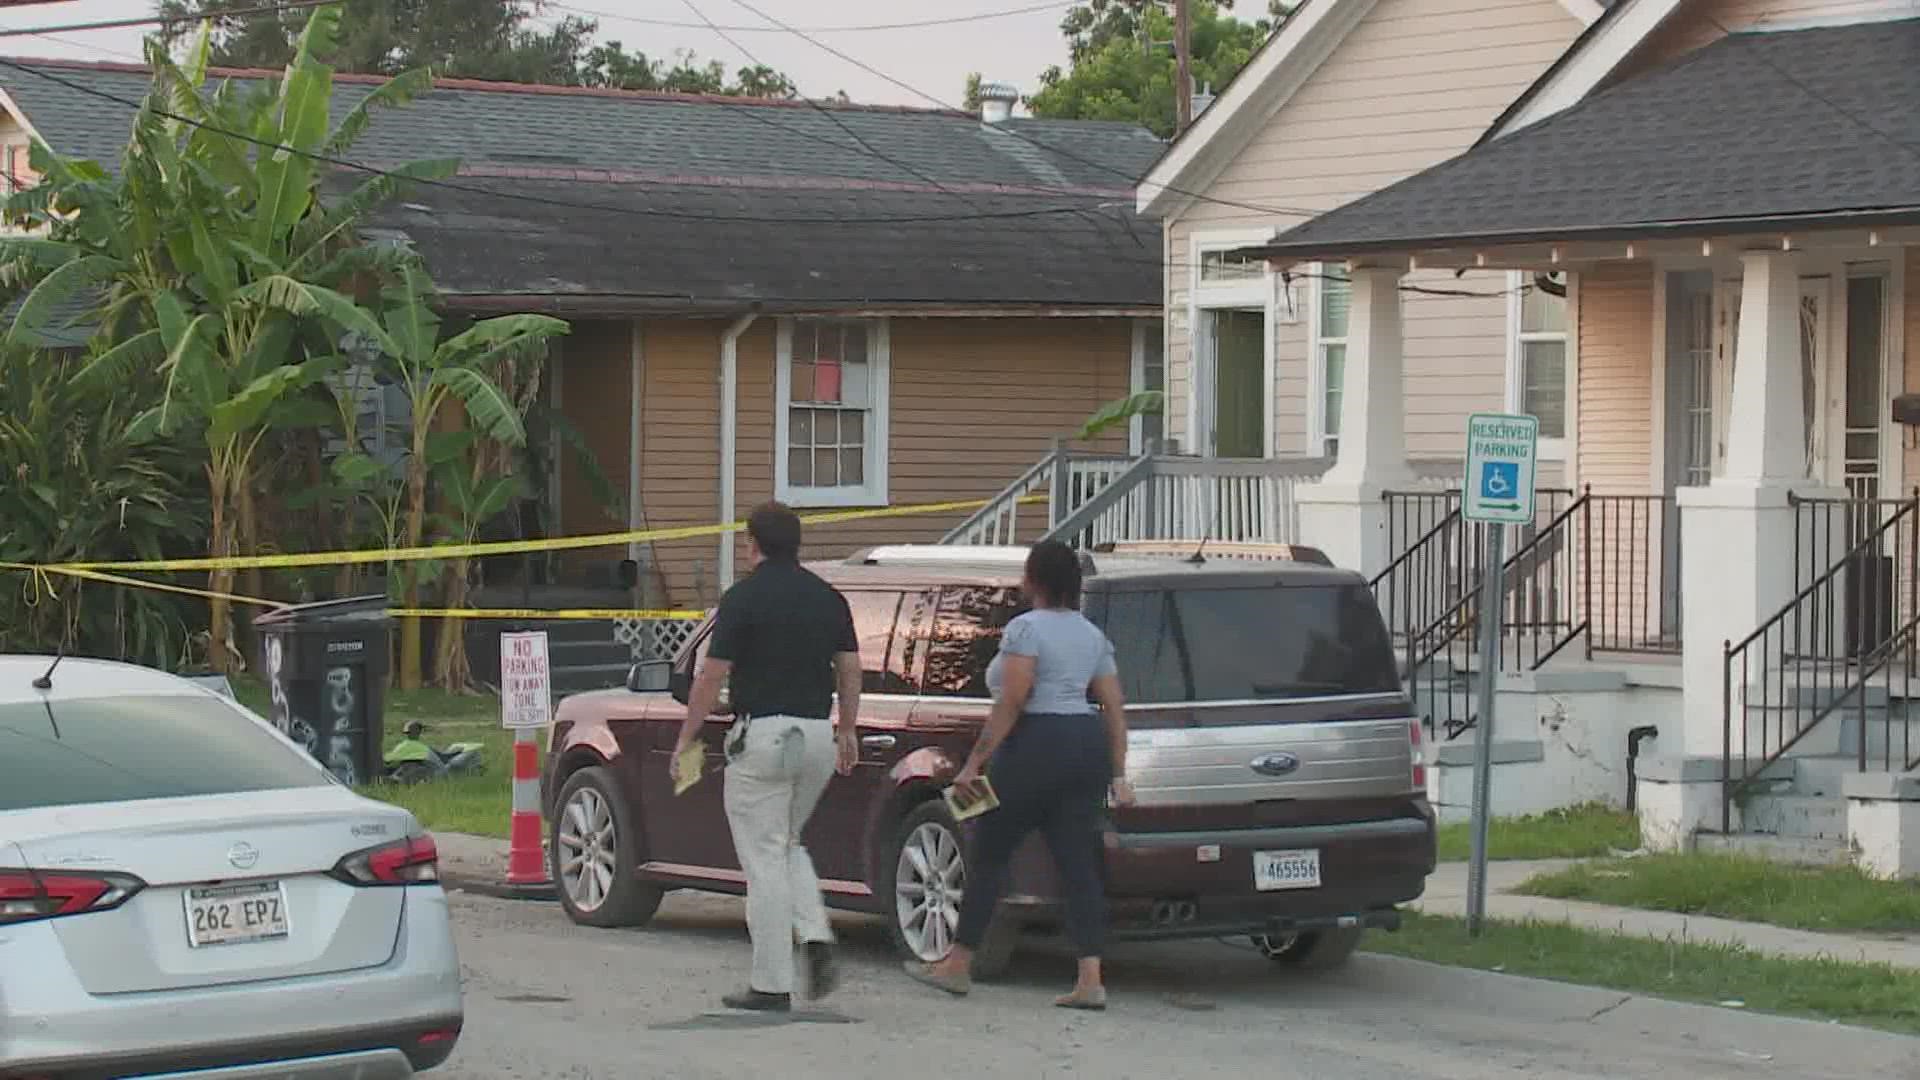 A 2 year old in Hollygrove was killed after being shot during a possible domestic dispute.